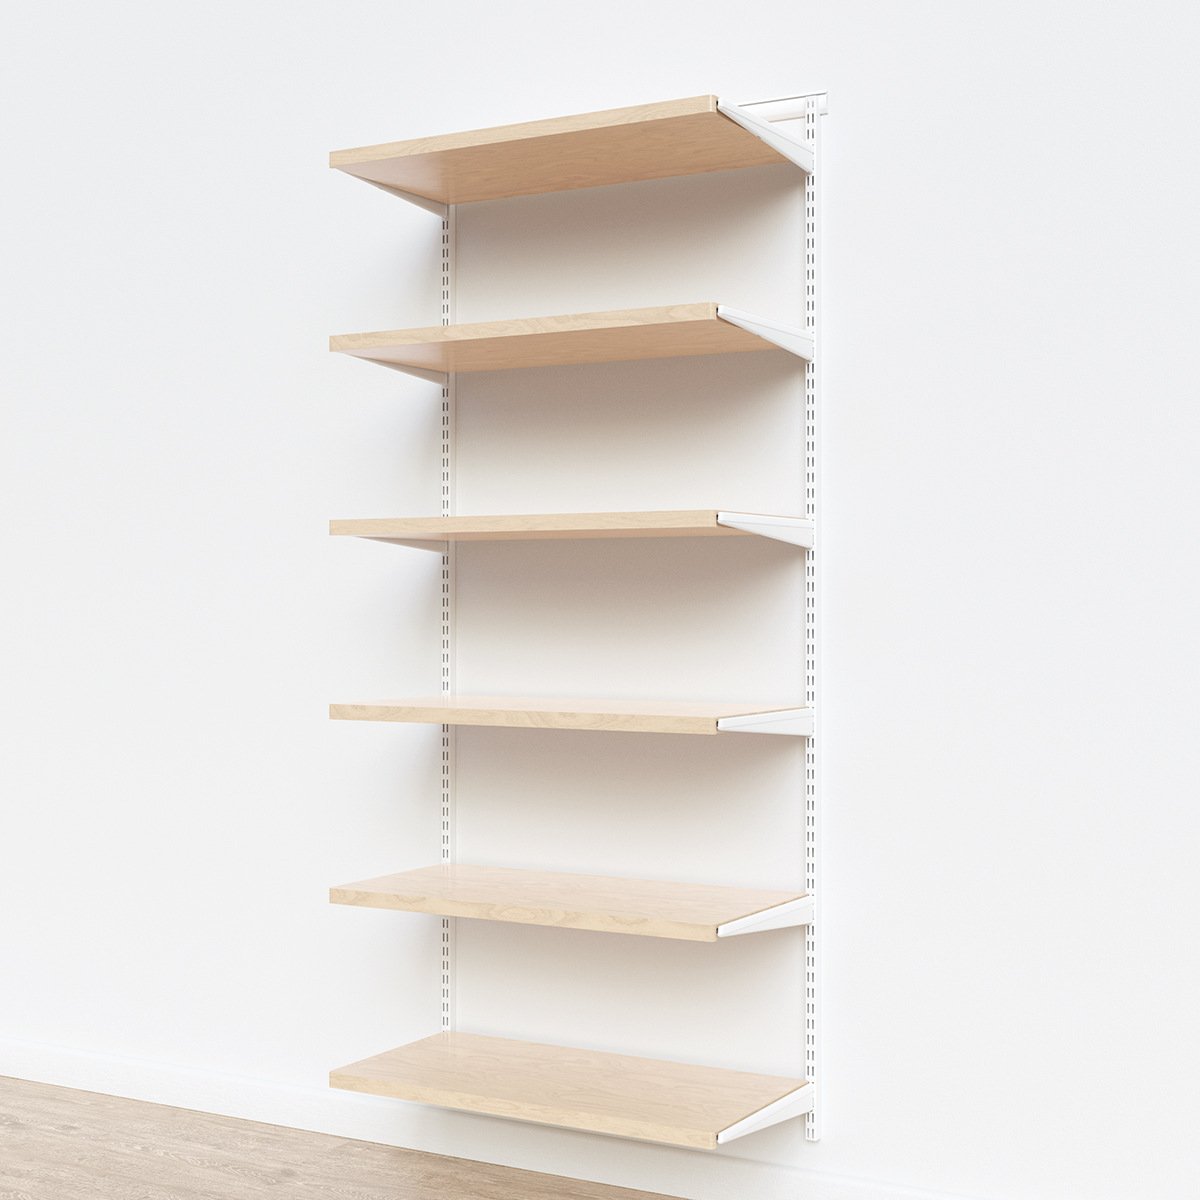 Elfa Decor 3' Basic Shelving Units for Anywhere | The Container Store